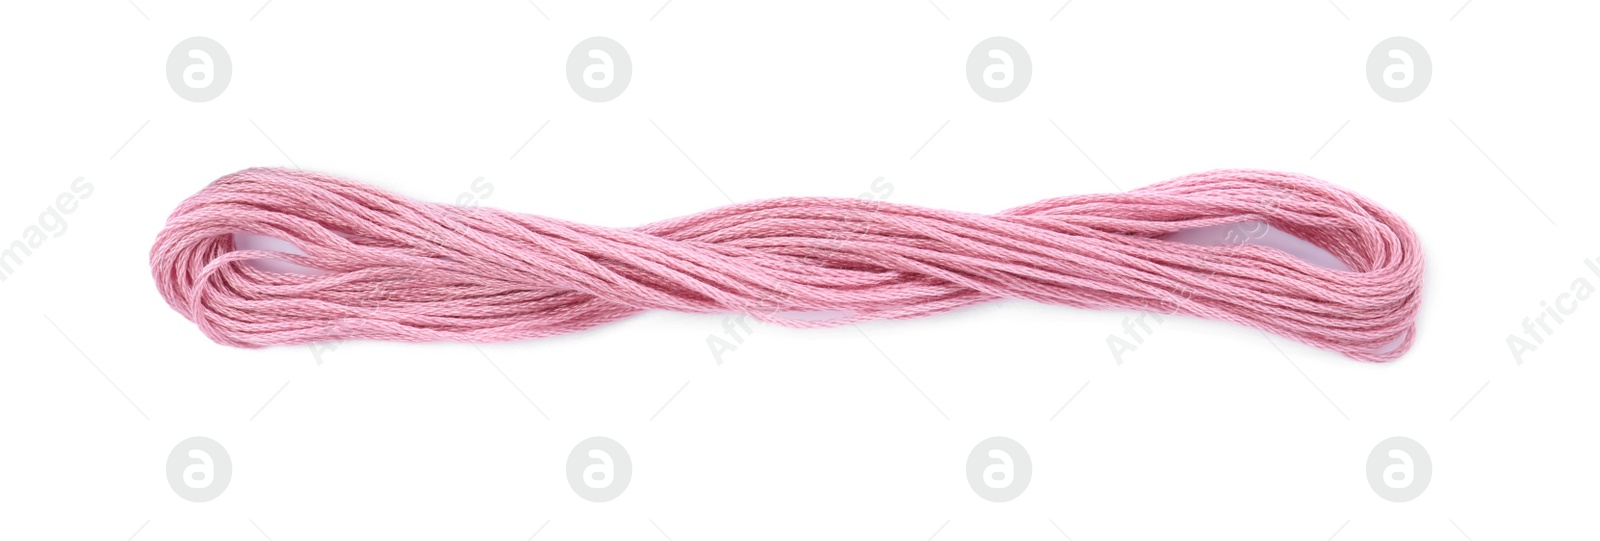 Photo of Pale pink embroidery thread on white background, top view